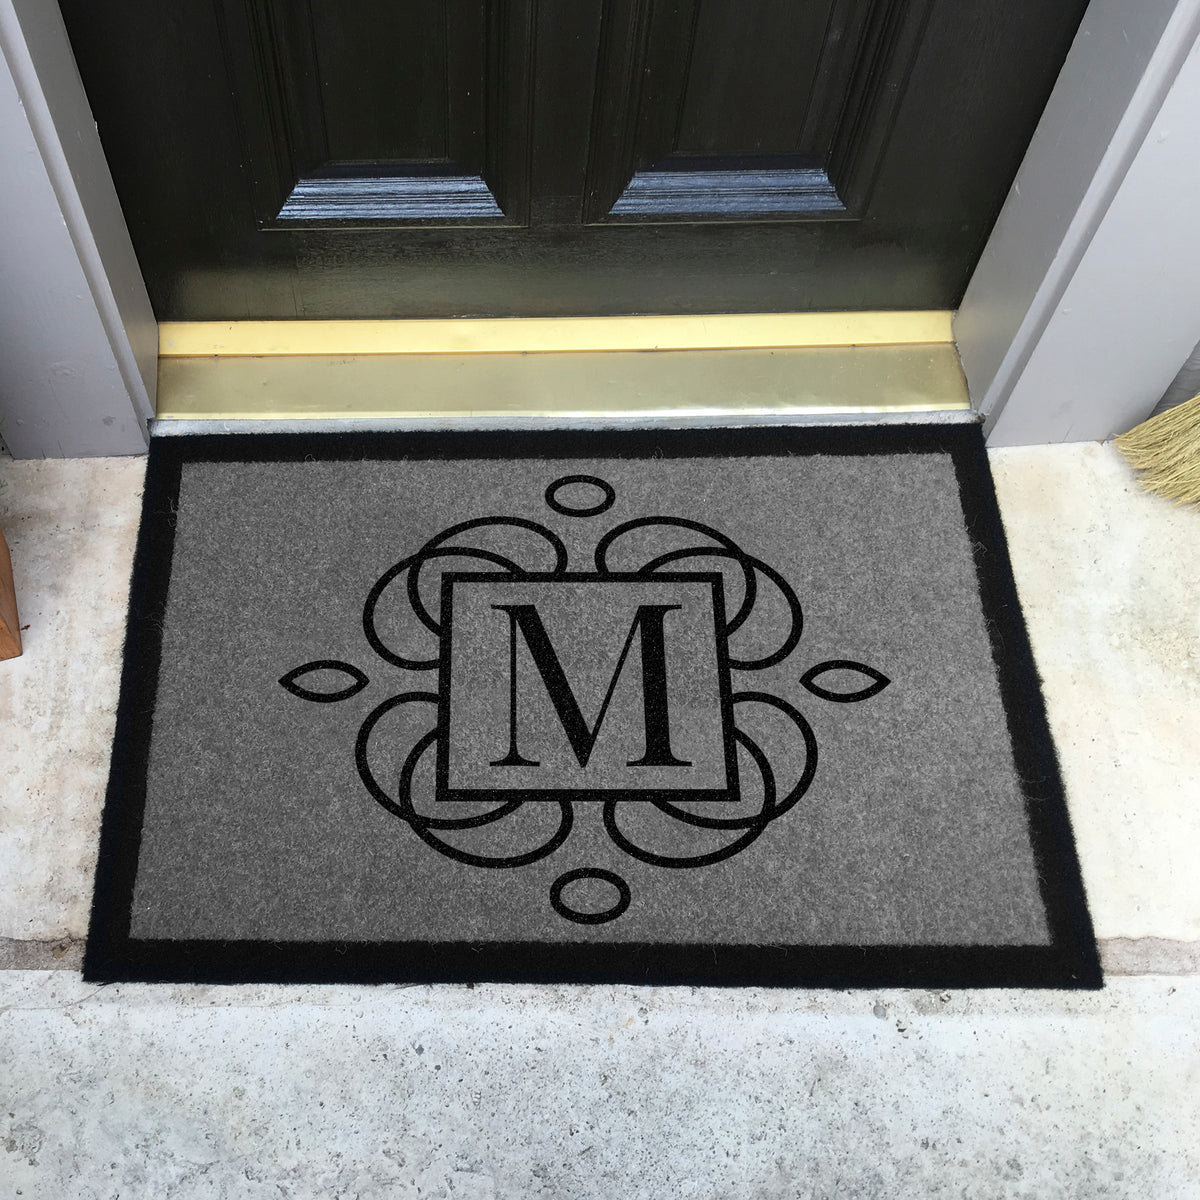 Infinity Custom Mats™ All-Weather Personalized Door Mat. STYLE: Floral Monogram  COLOR: GREY AND BLACK